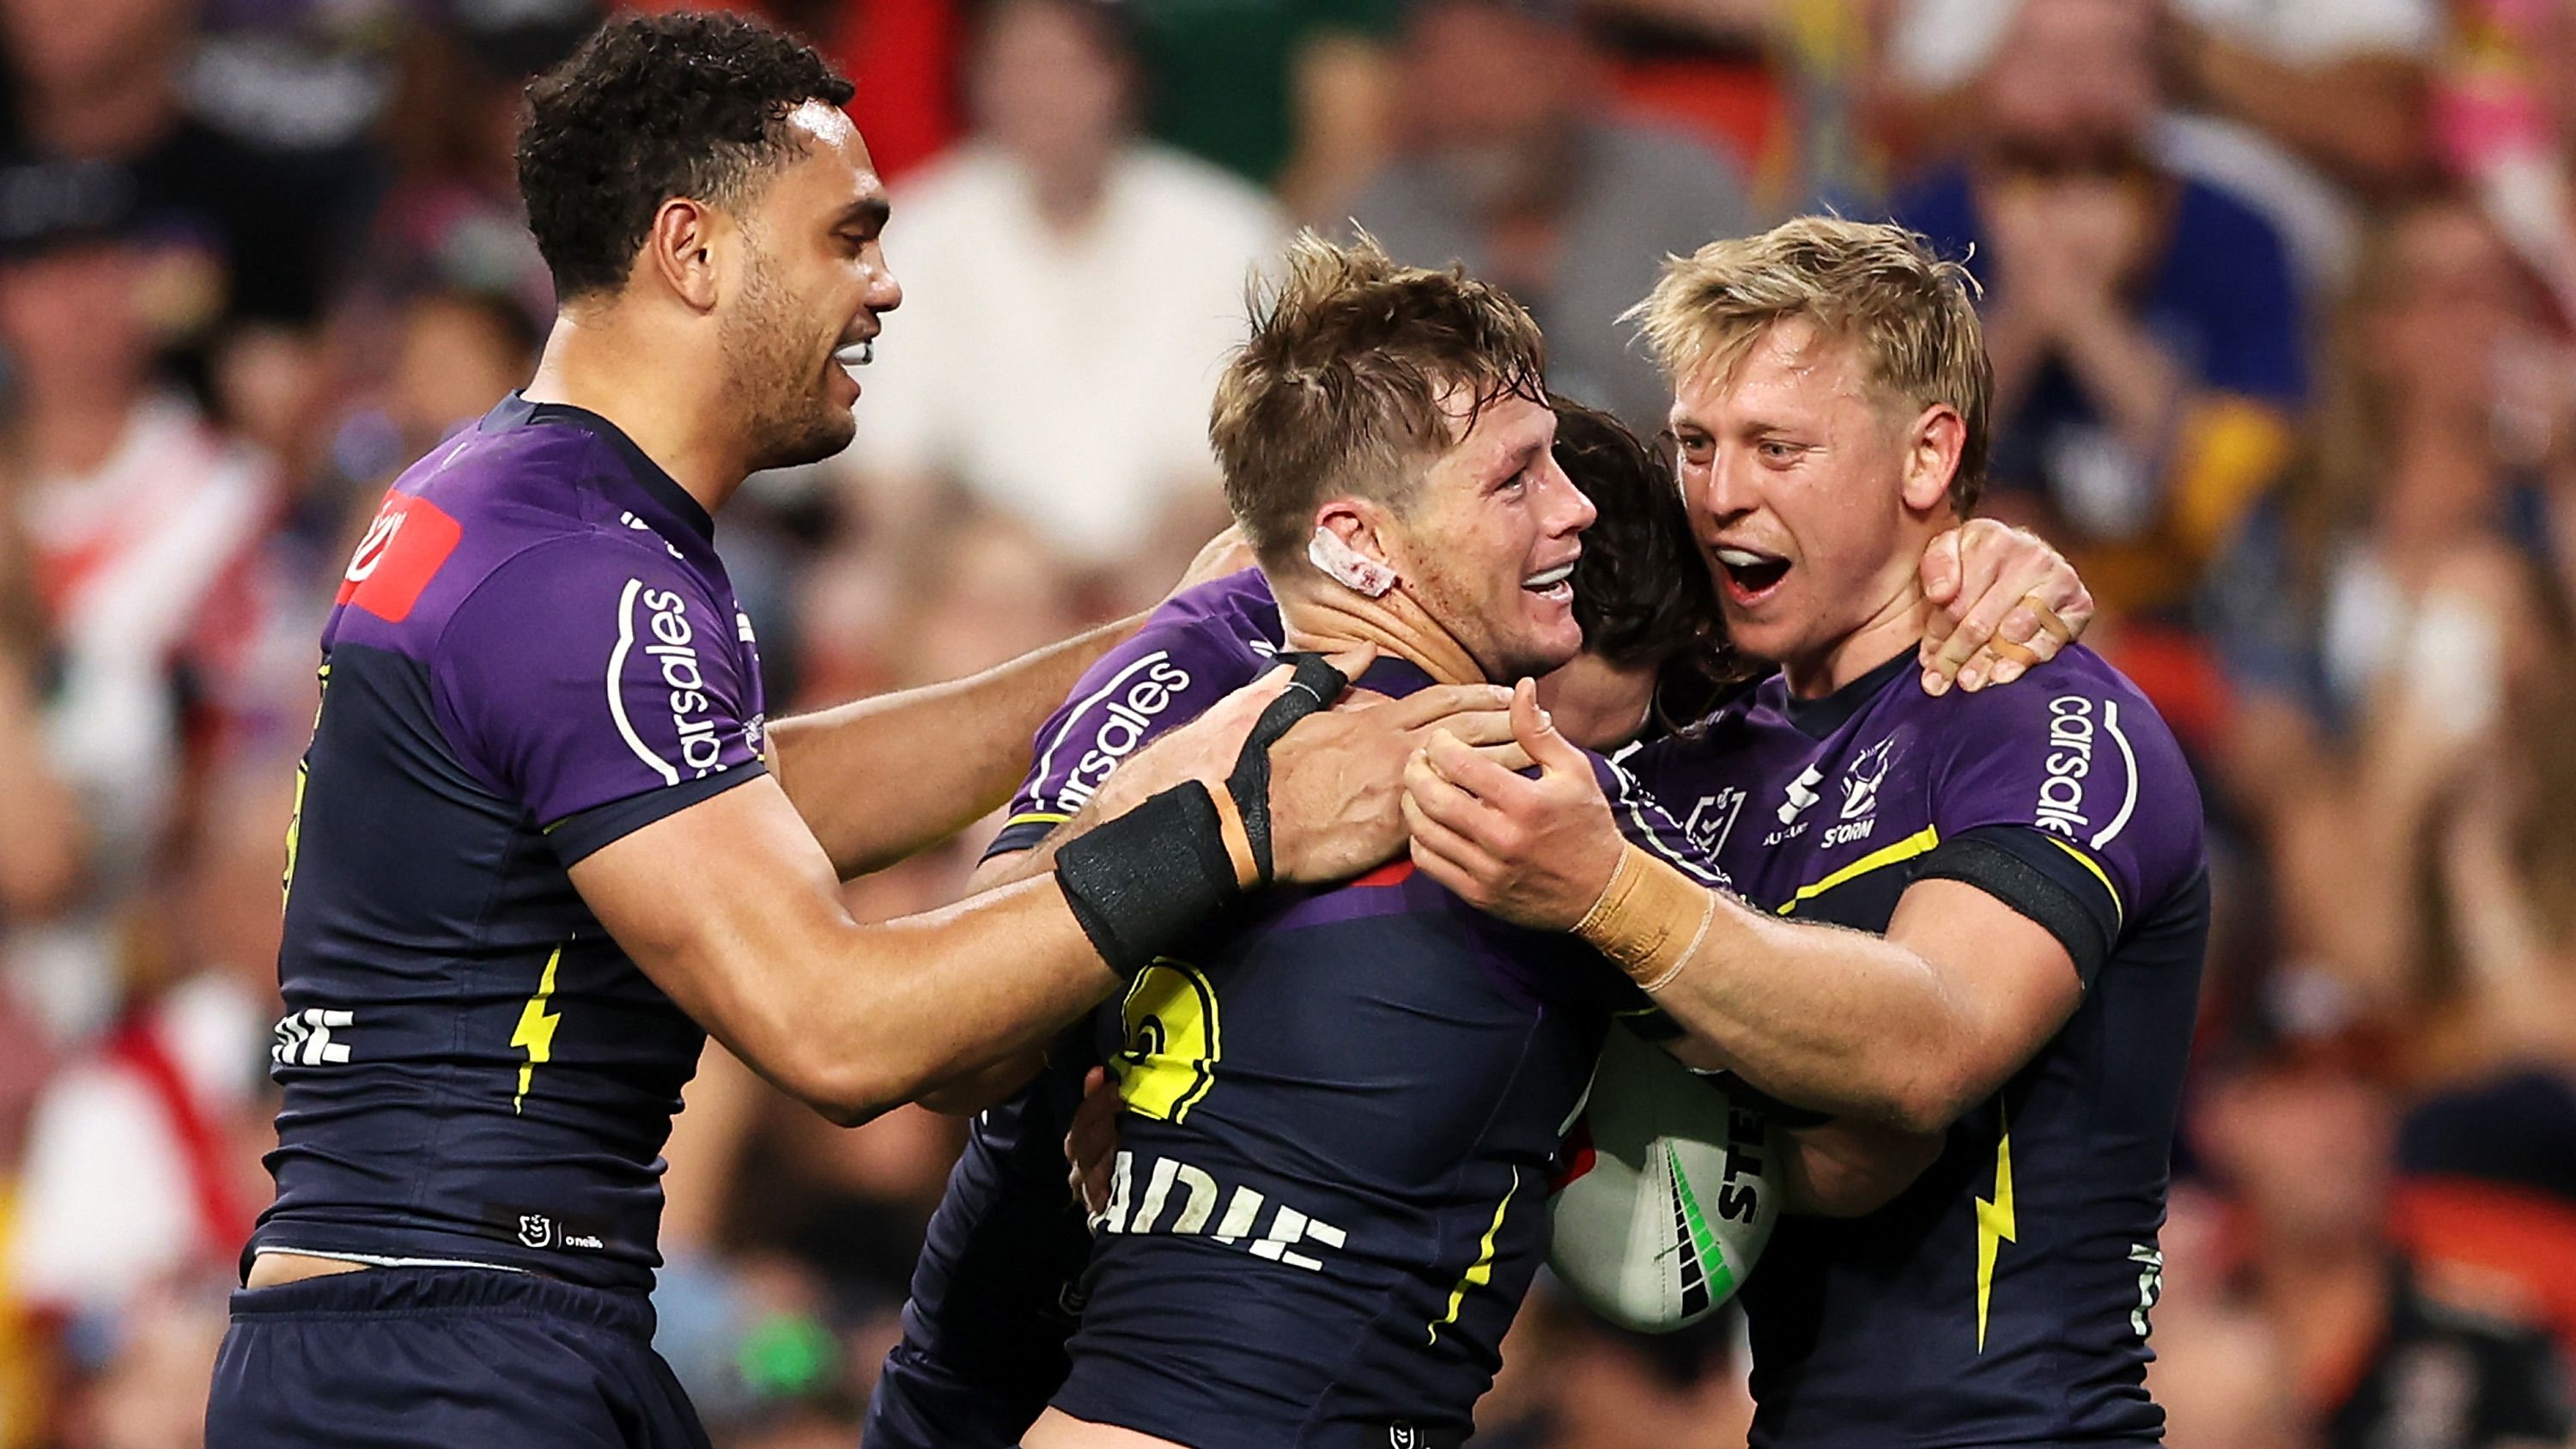 Harry Grant of the Storm celebrates with his teammates after scoring a try against the Eels.